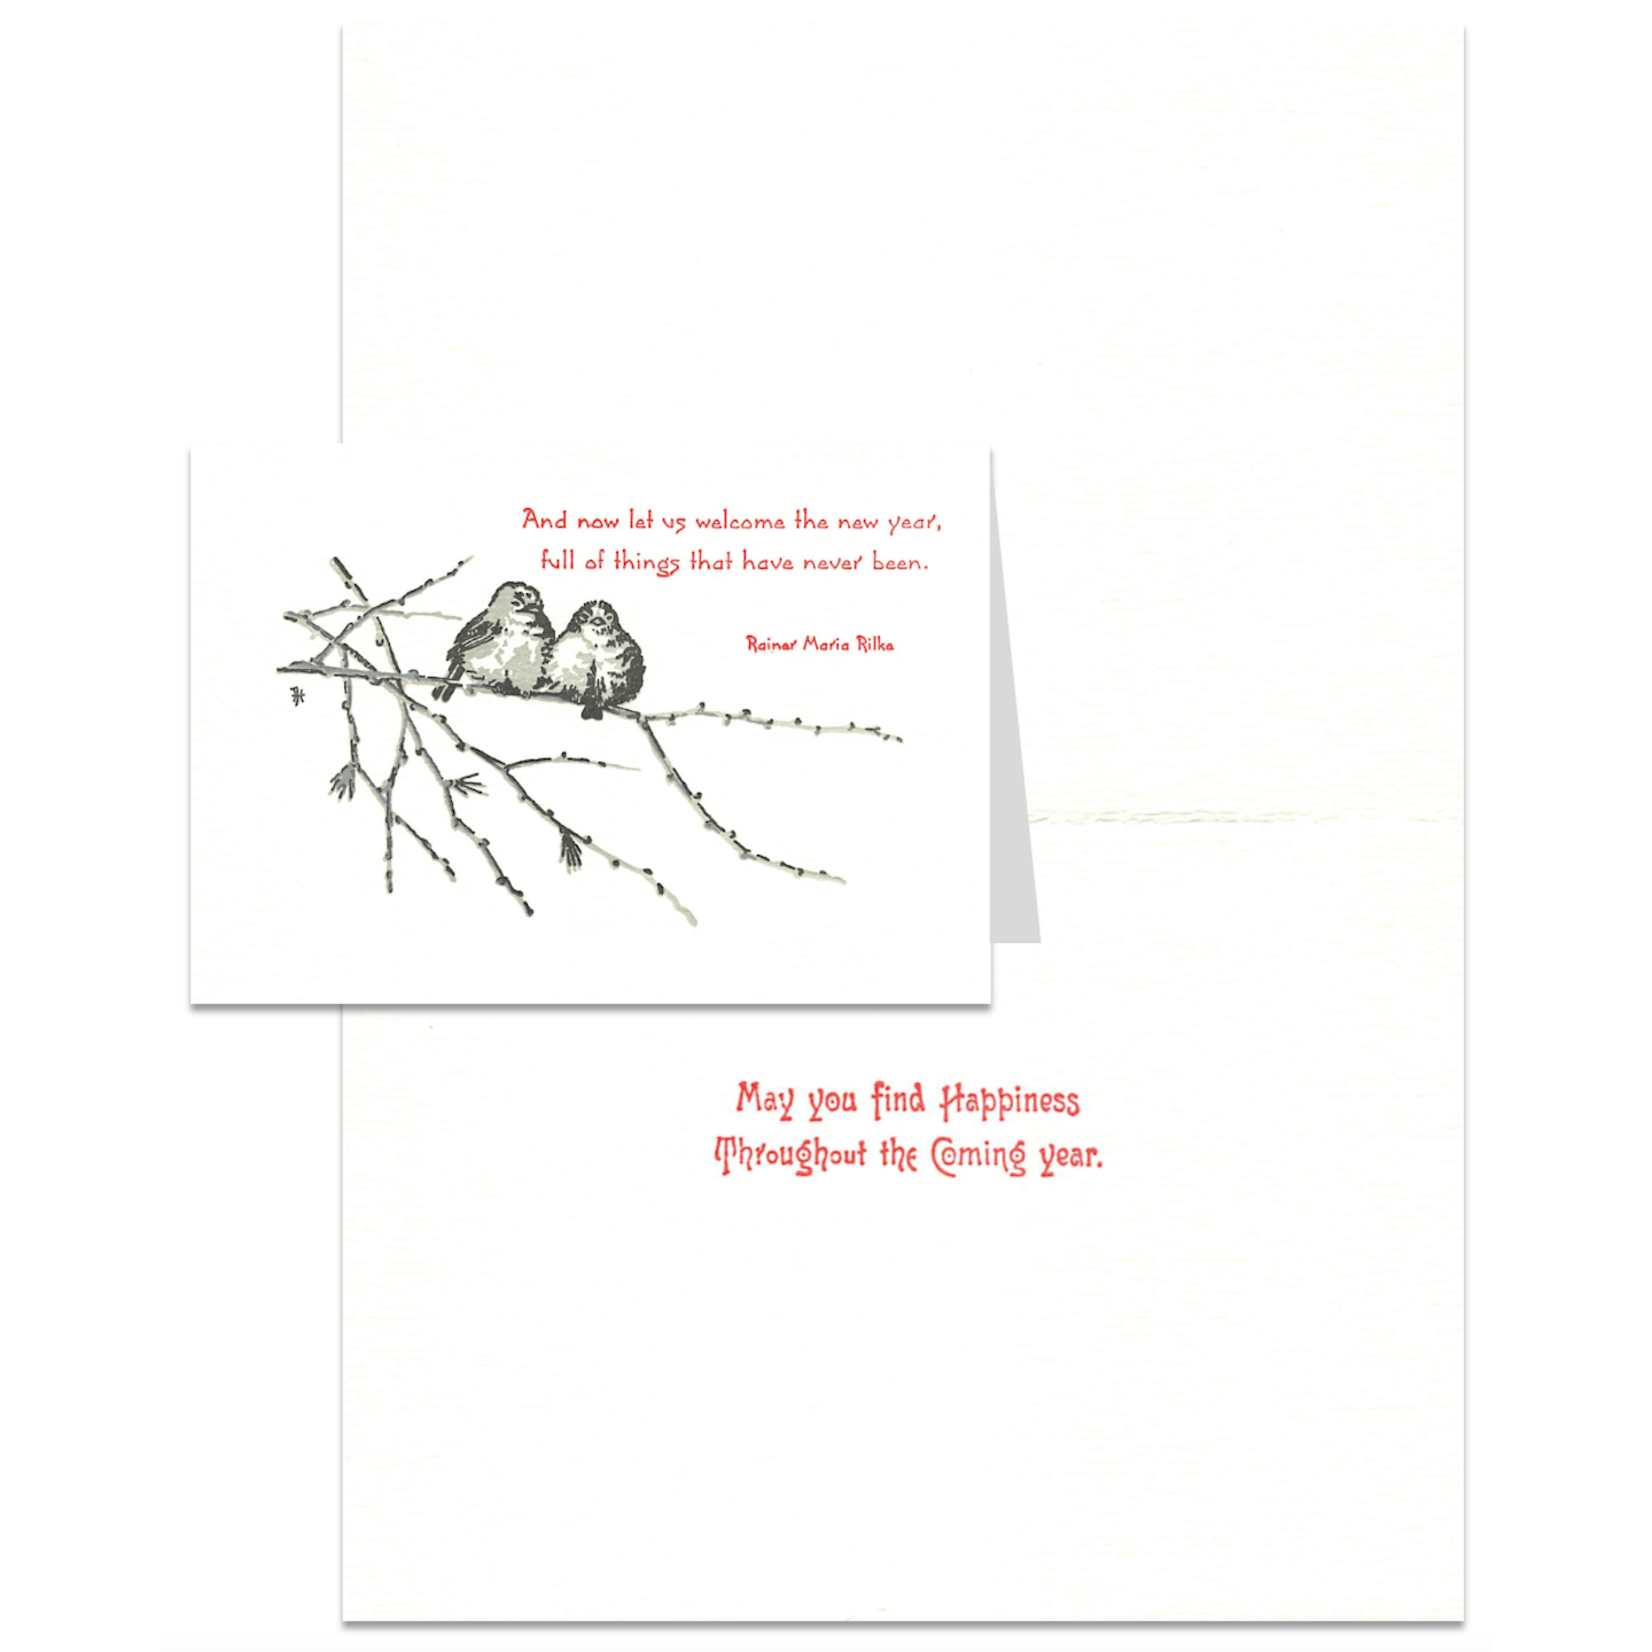 SATURN PRESS Junco Box of Holiday Cards